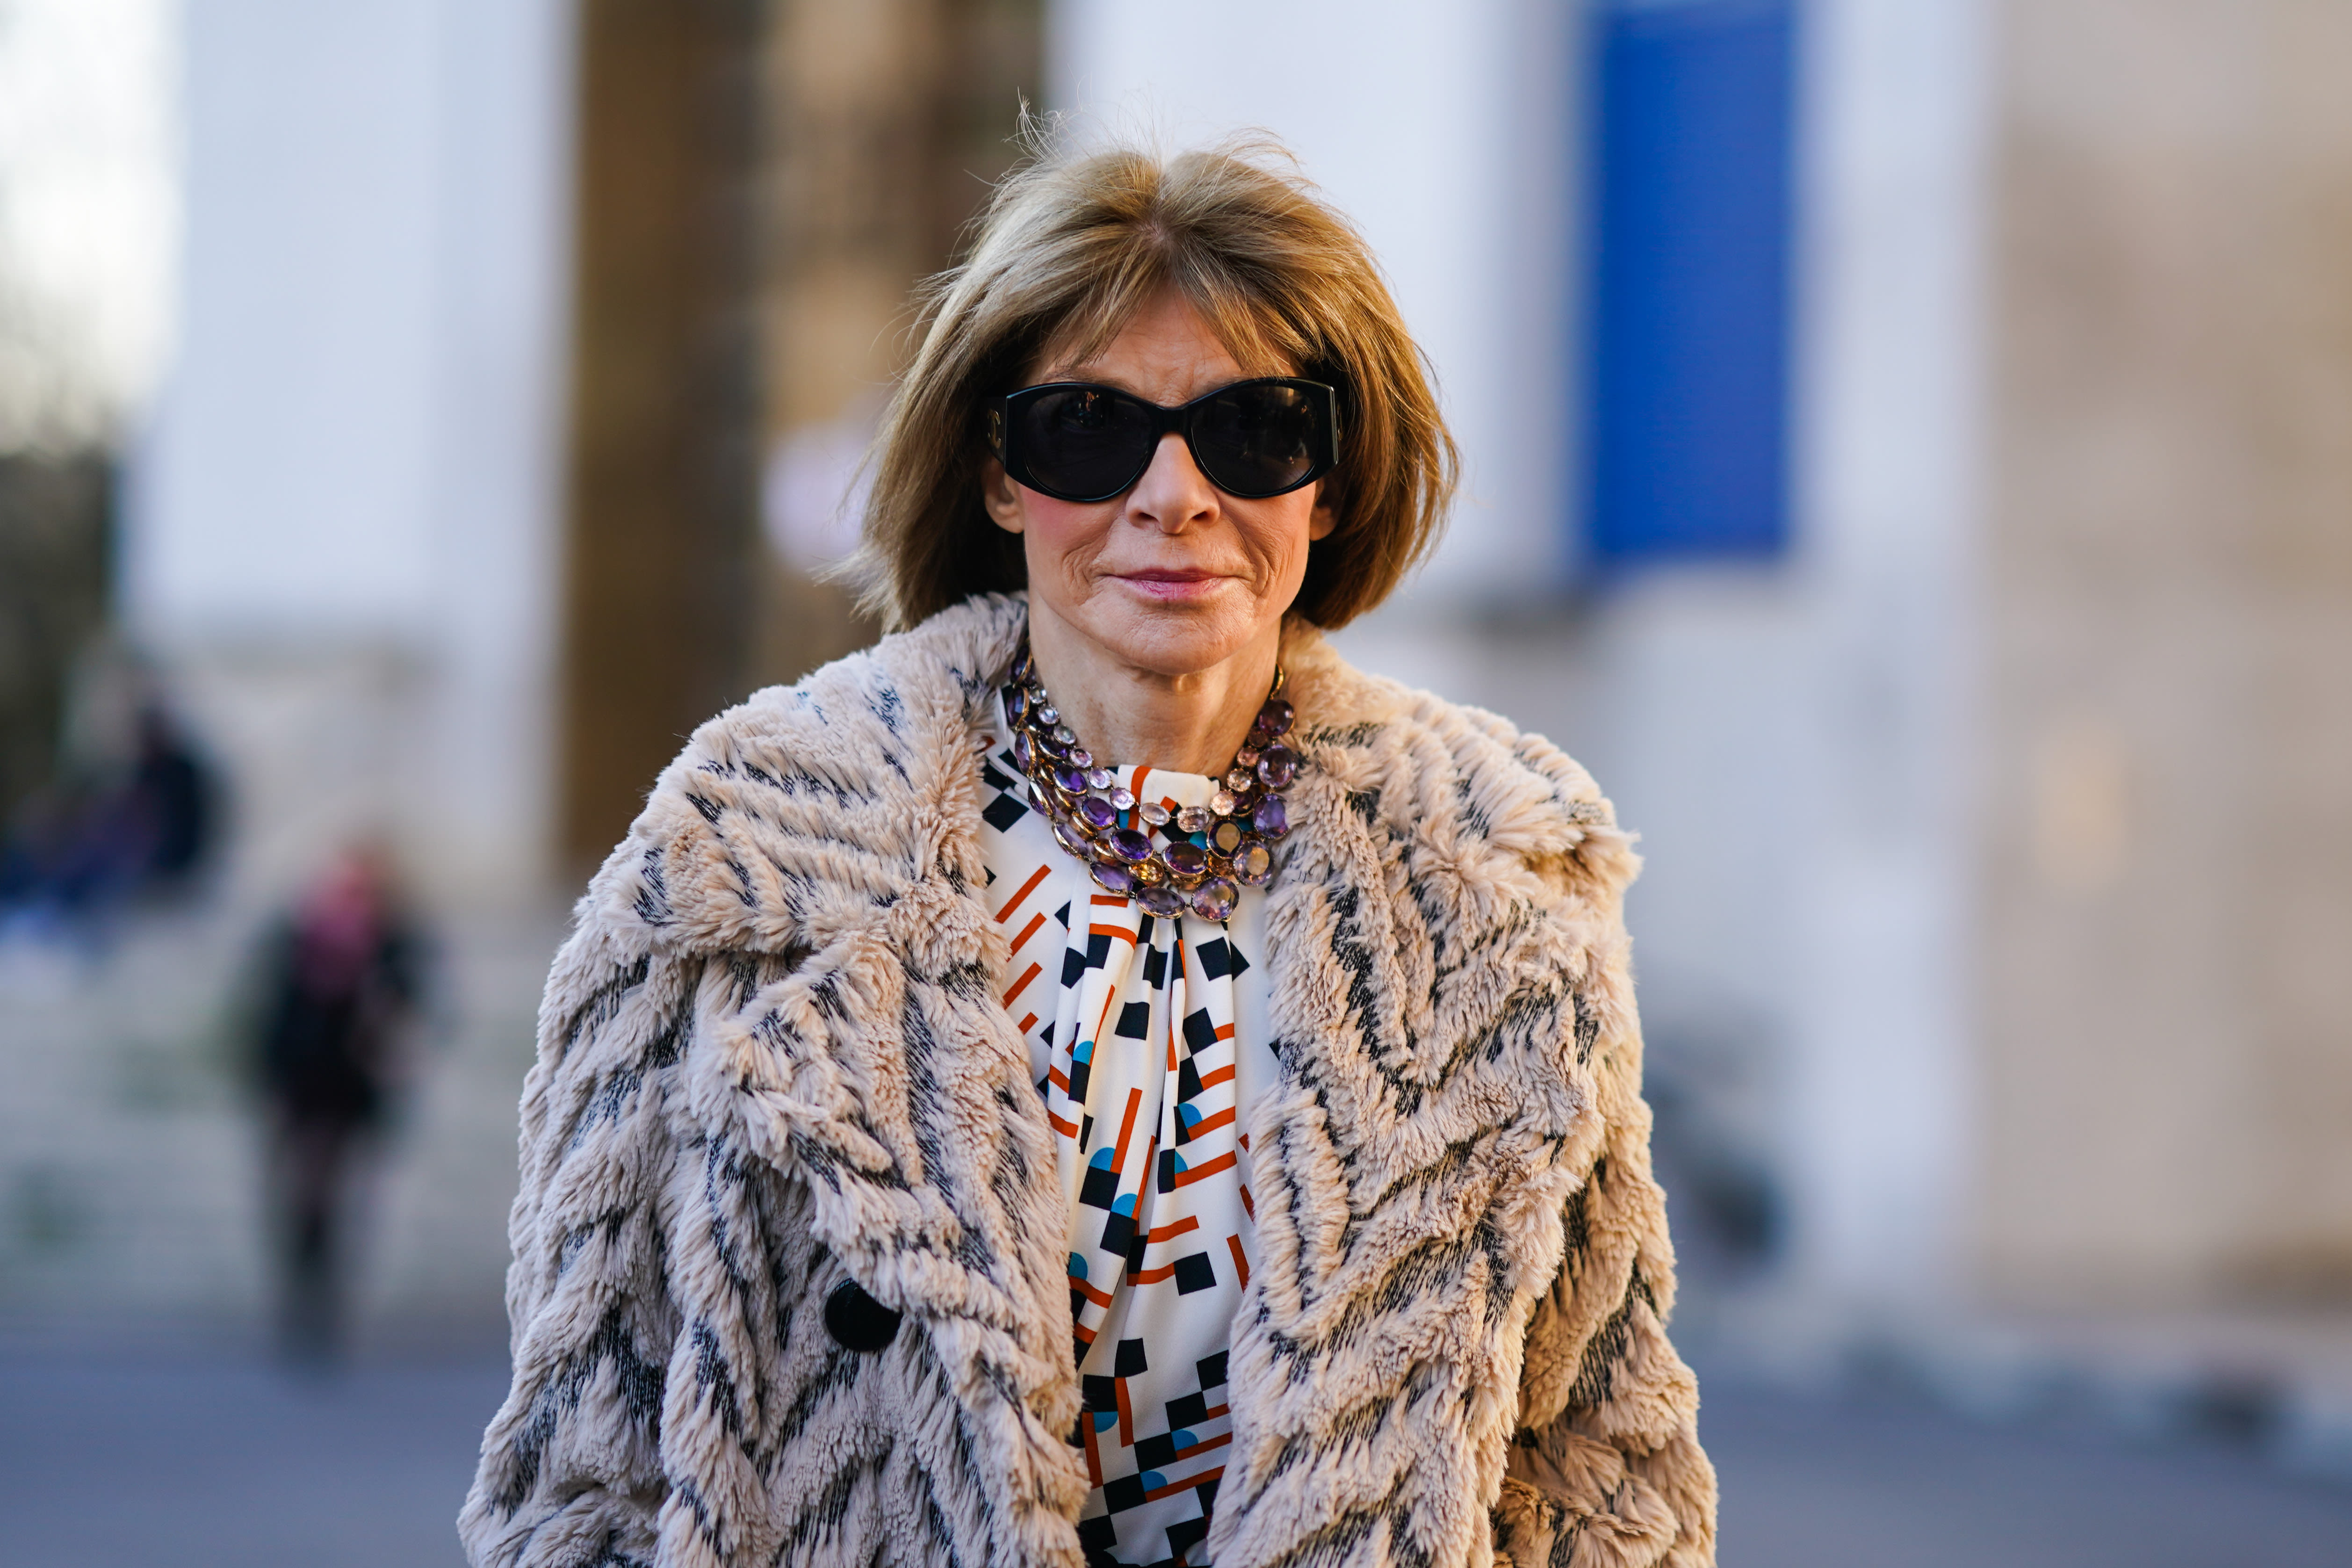 Who Is Anna Wintour? Get to Know the ‘Vogue’ Editor Behind the Annual Met Gala